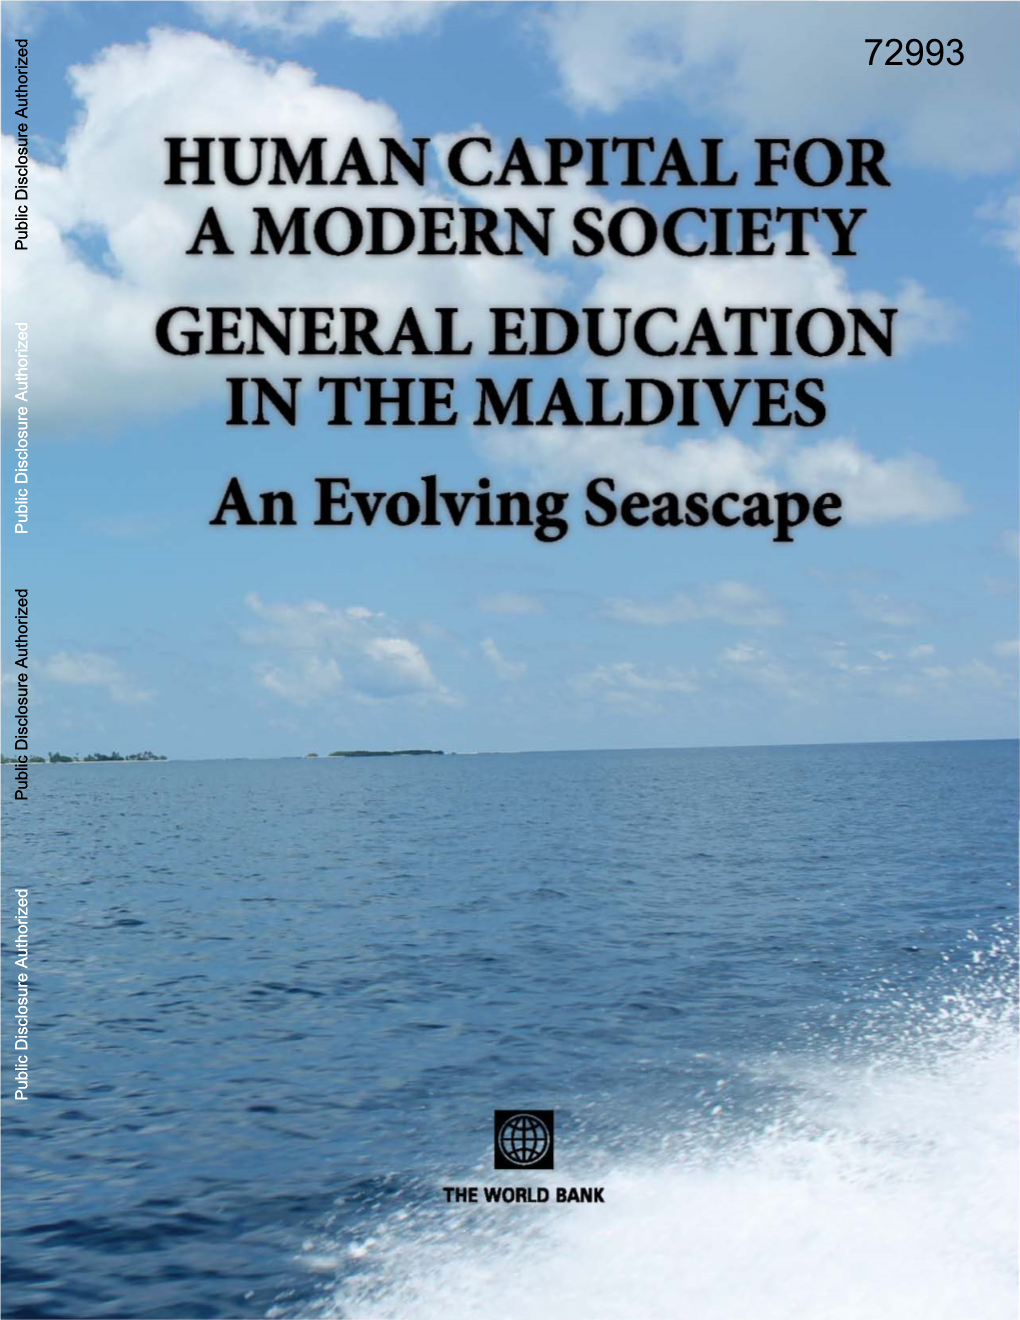 Human Capital for a Modern Socie-Ty General Education in the Maldives